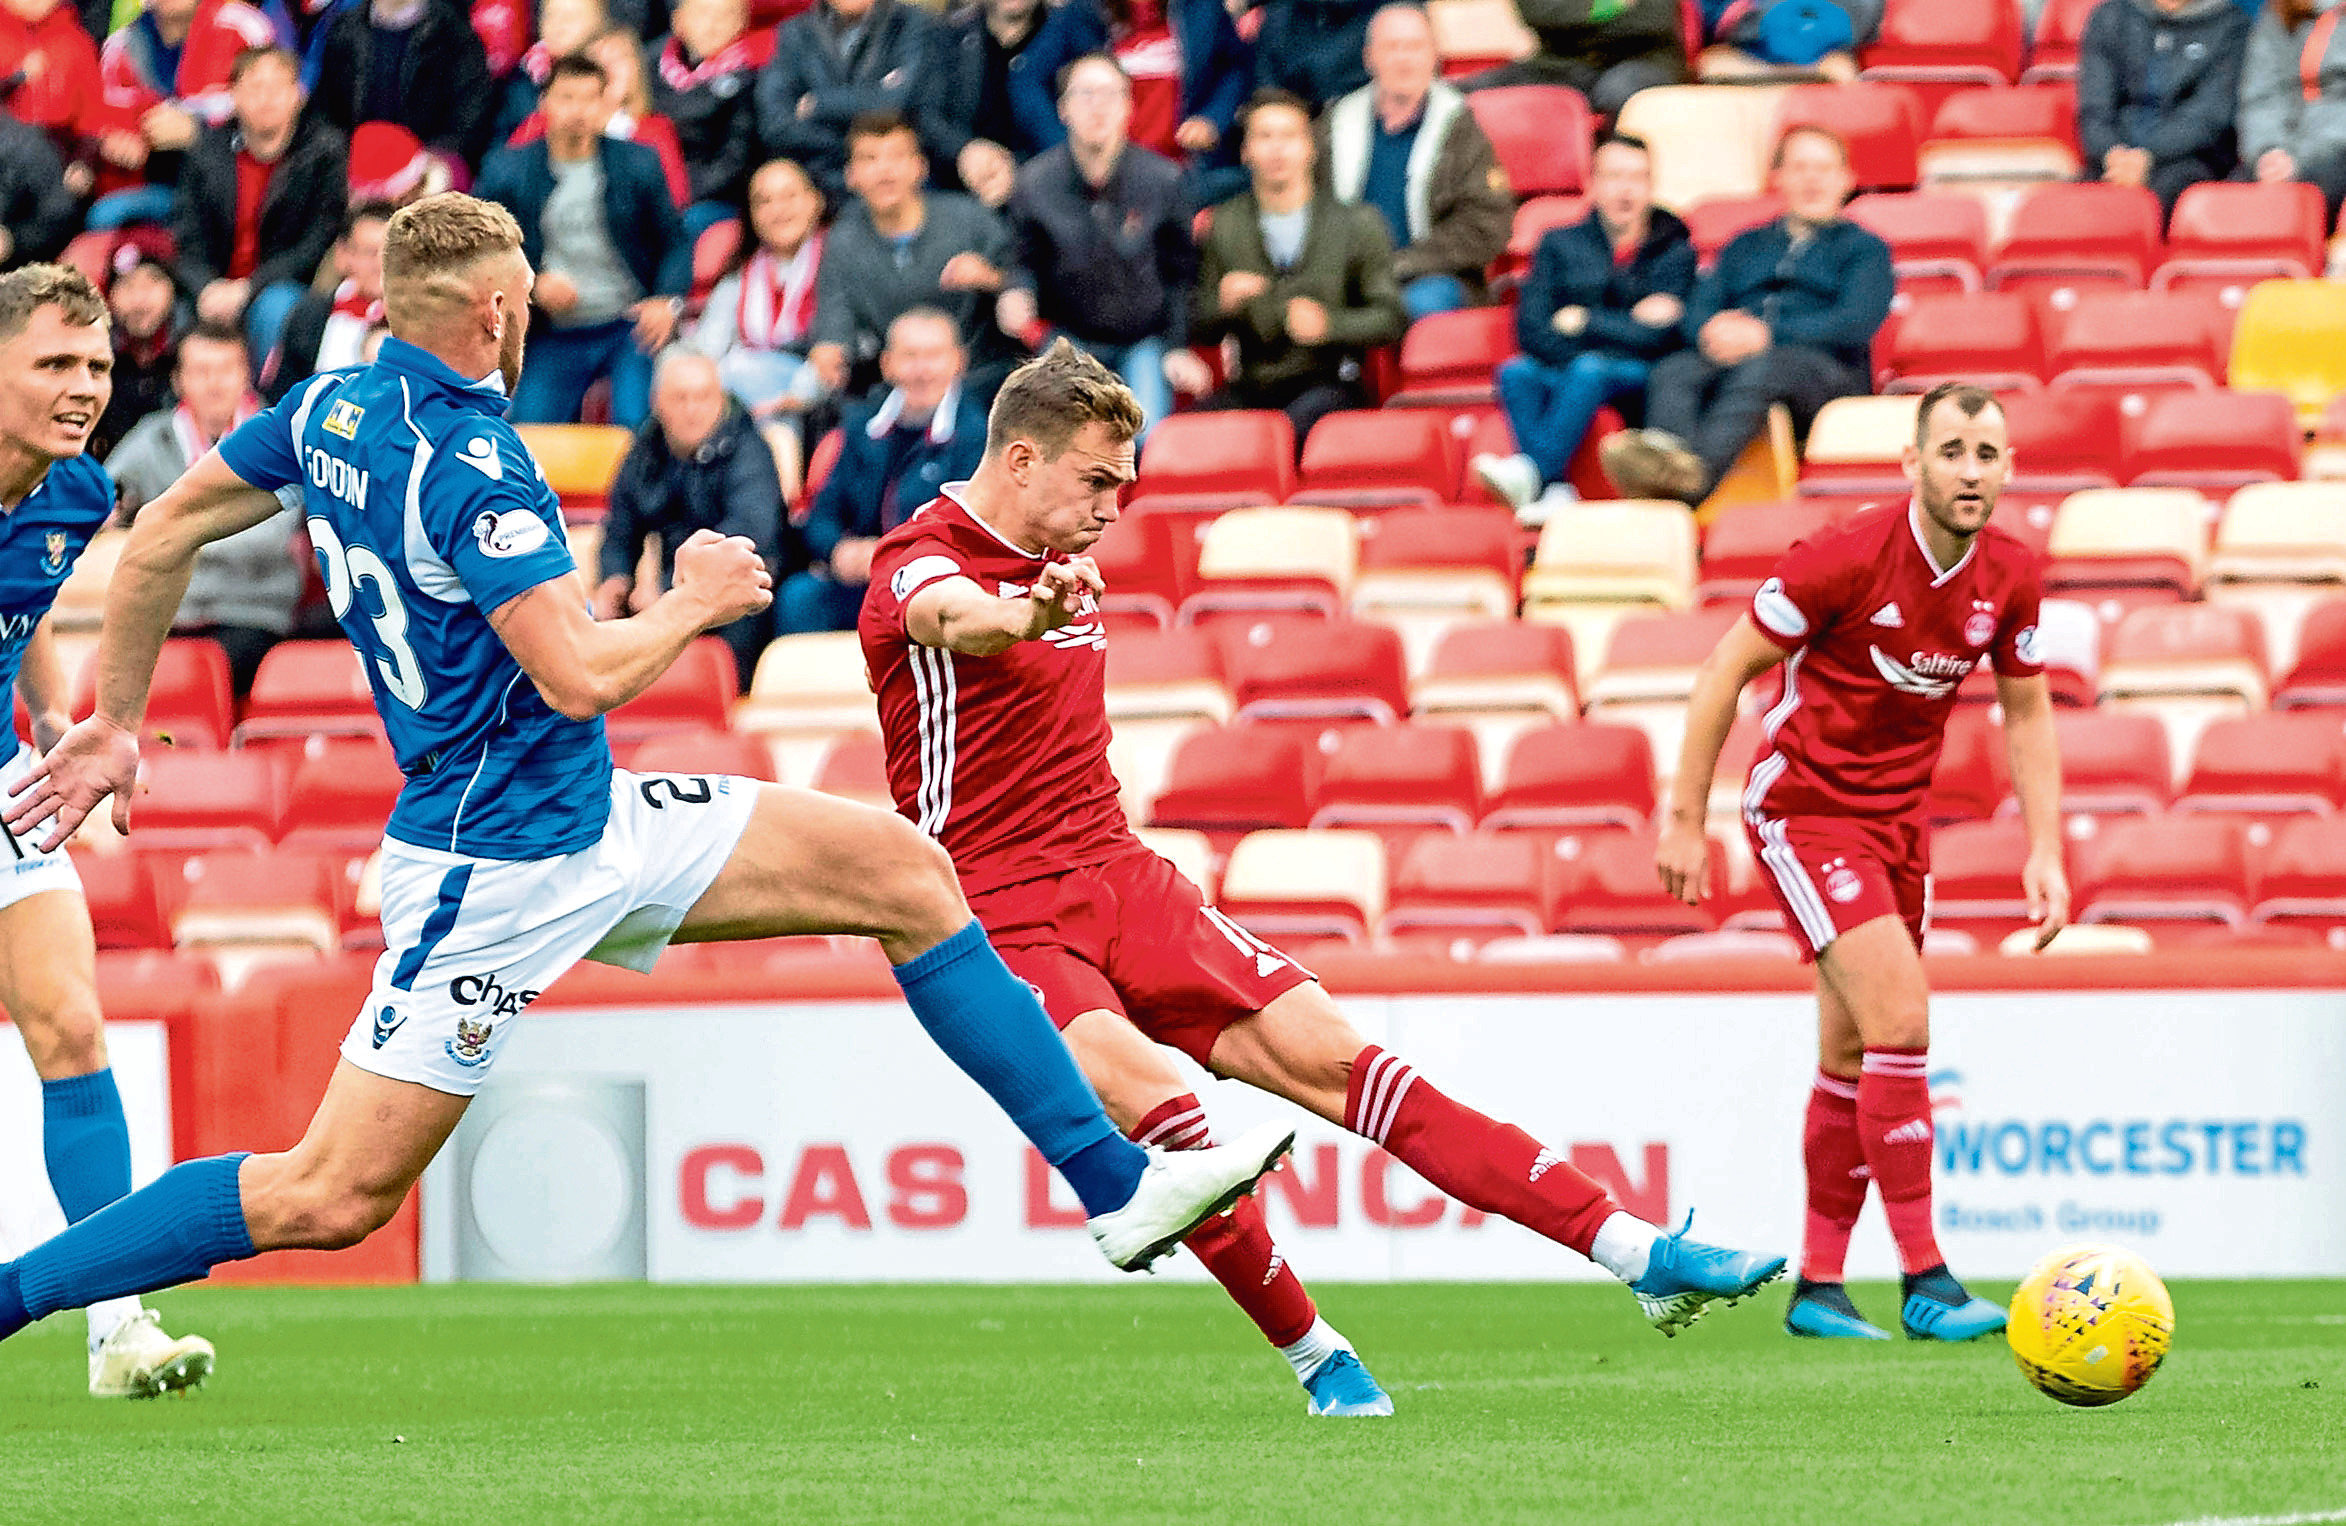 Aberdeen's Ryan Hedges scores to make it 1-0 during the Ladbrokes Premiership match between Aberdeen and St Johnstone